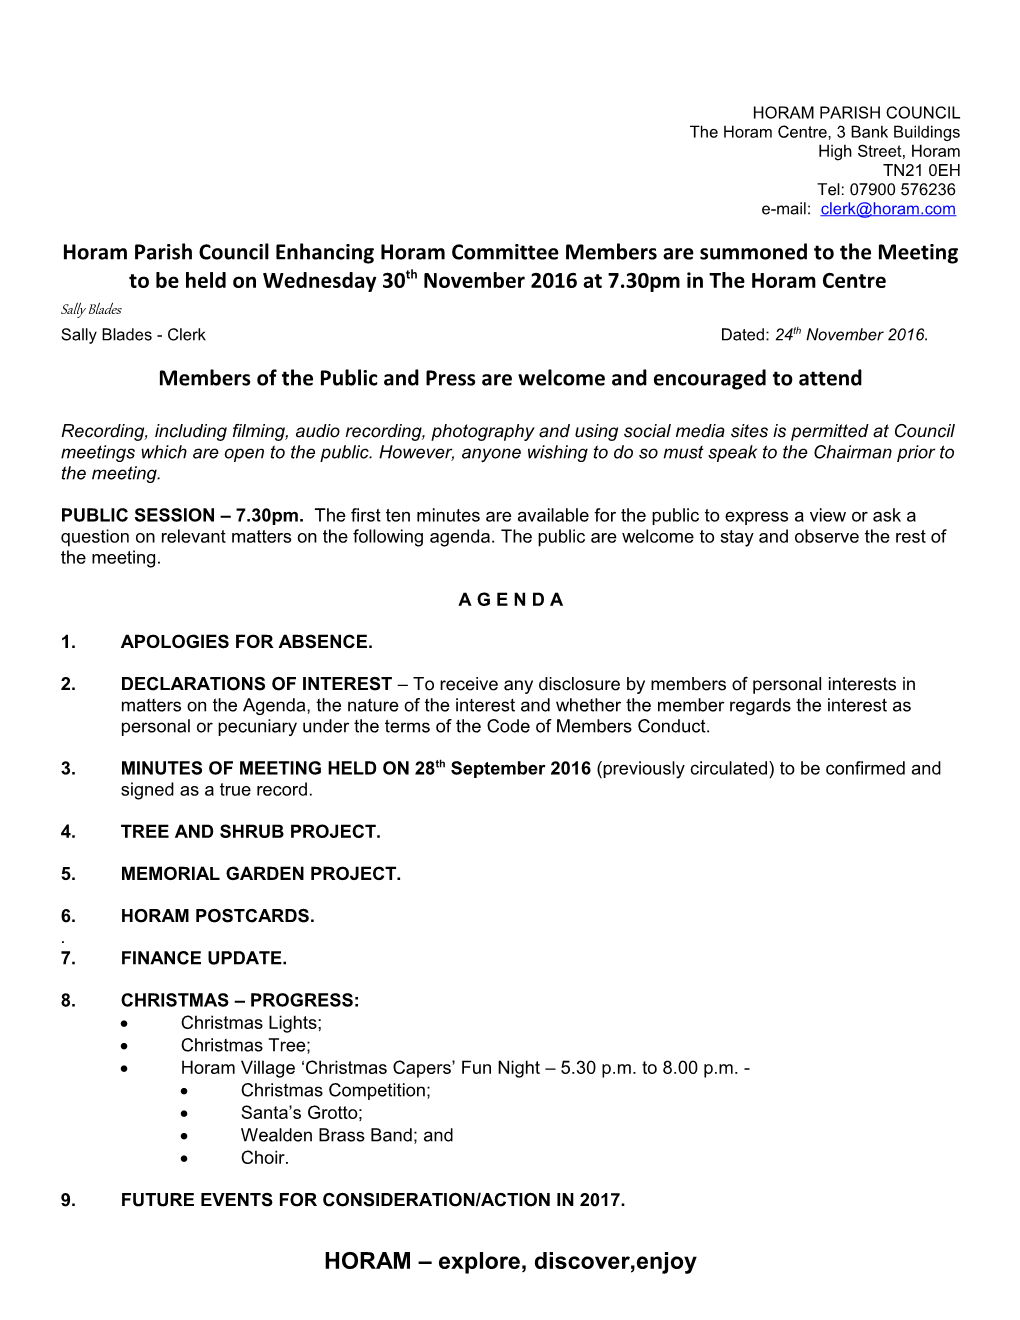 Horam Parish Council Planning Committee Meeting s5